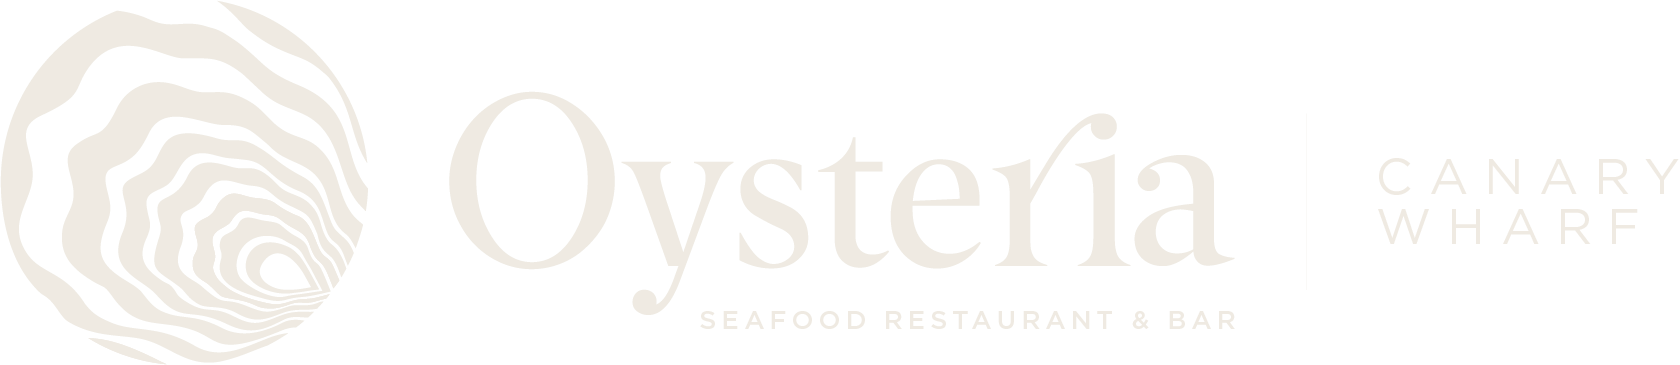 Logo of Oysteria seafood restaurant in Canary Wharf